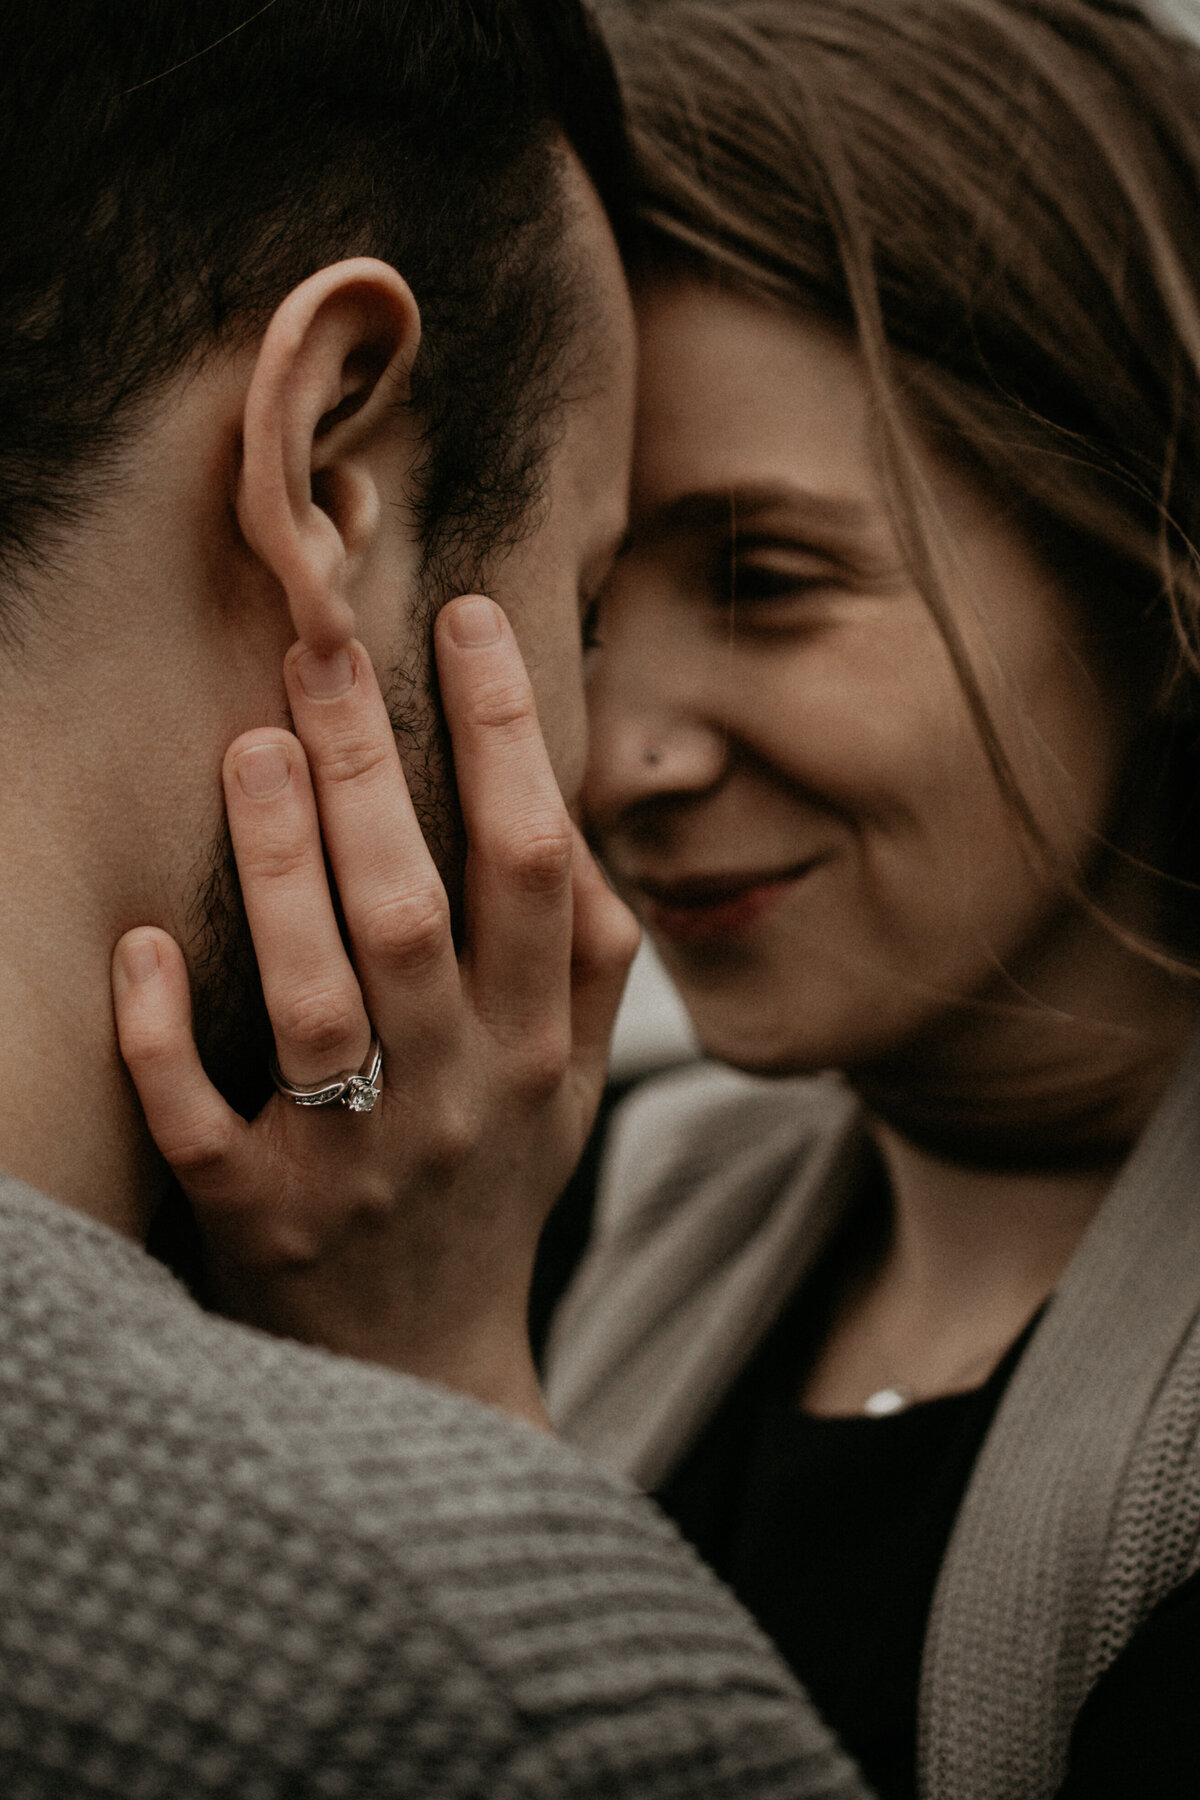 close up of a couple pressing their foreheads together. View is over the guys shoulder so you can see the girl's face. The focus is on her engagement ring.